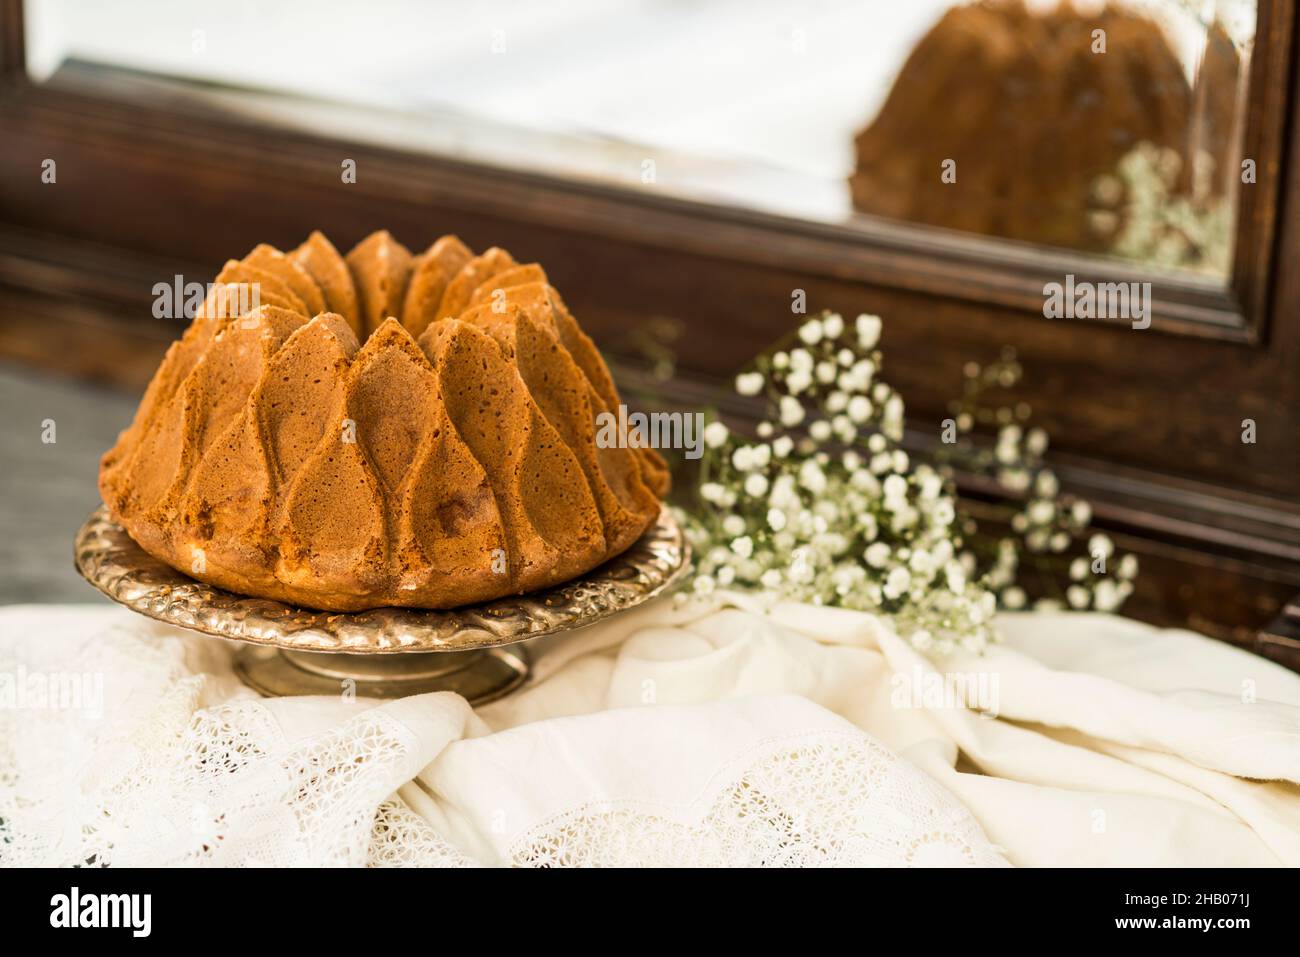 Still life with an apple sponge cake decorated with flowers and kitchen utensils, with a mirror in the background. Stock Photo